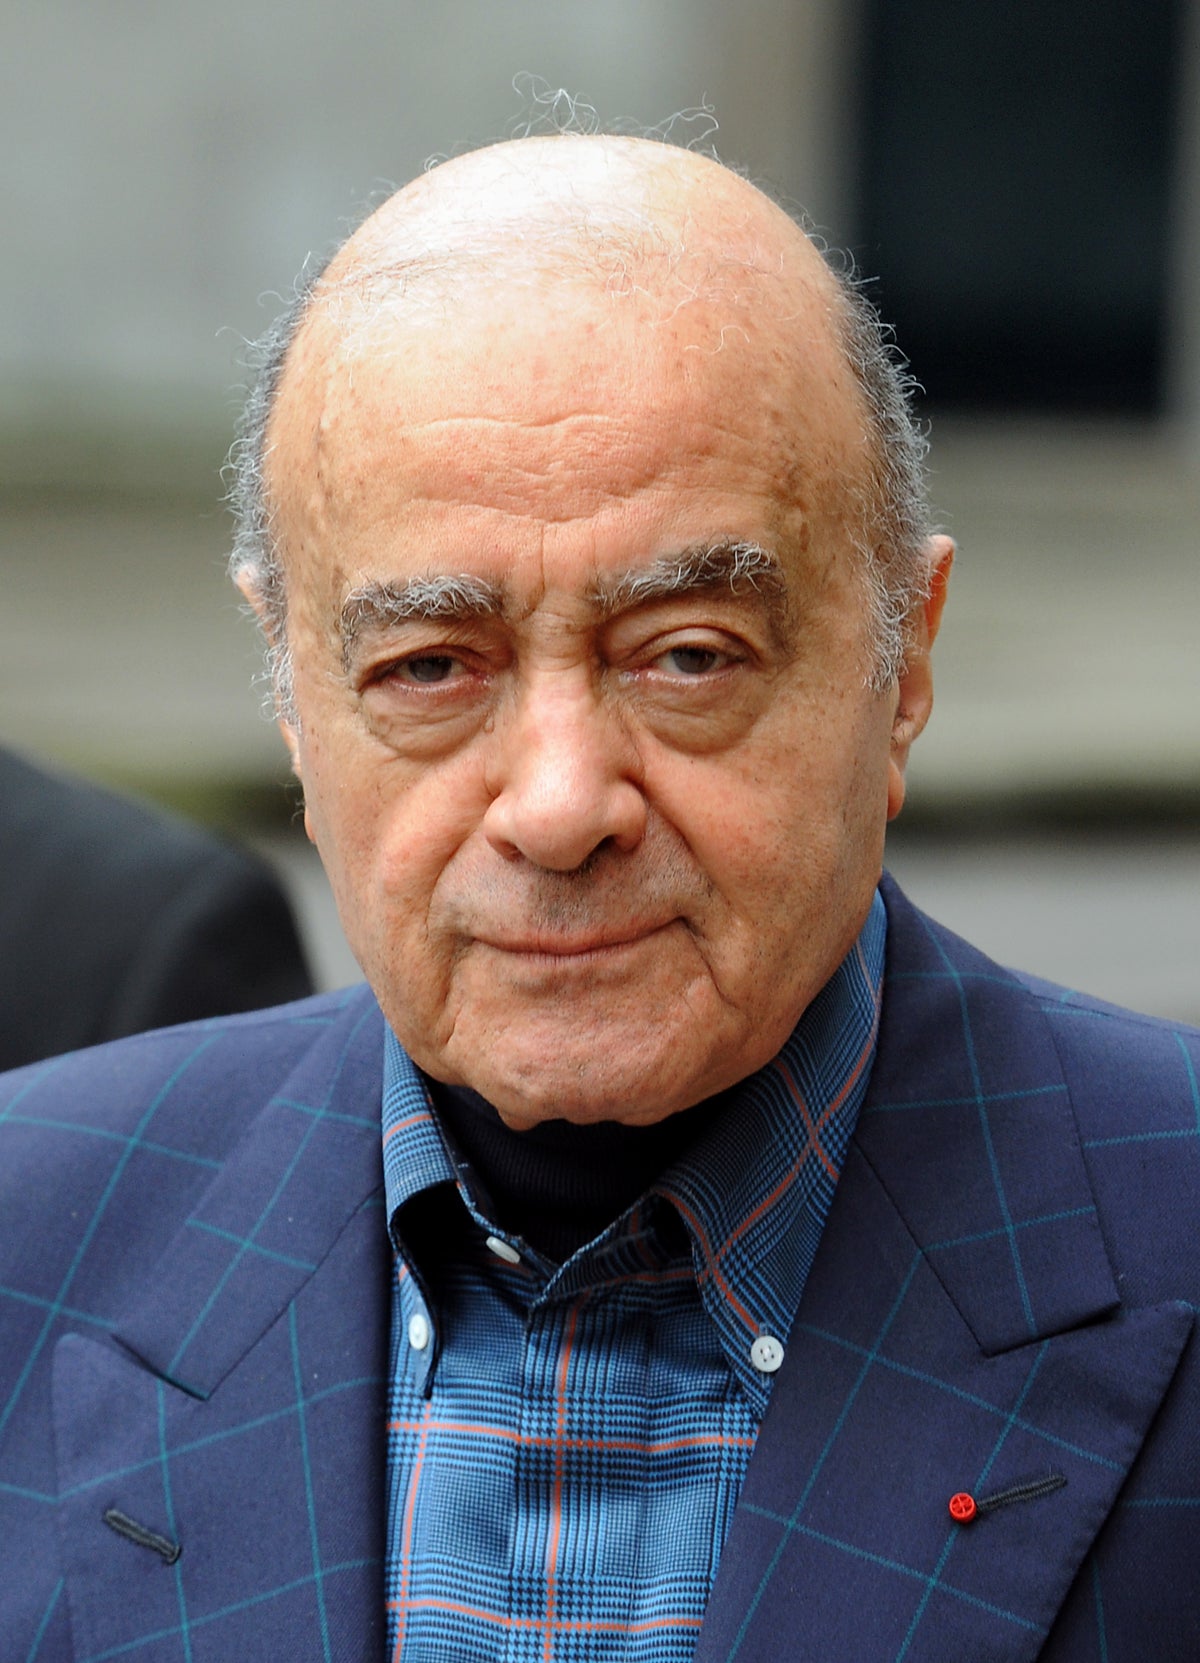 Mohamed Al Fayed, billionaire and father of Princess Diana’s partner Dodi, dies aged 94